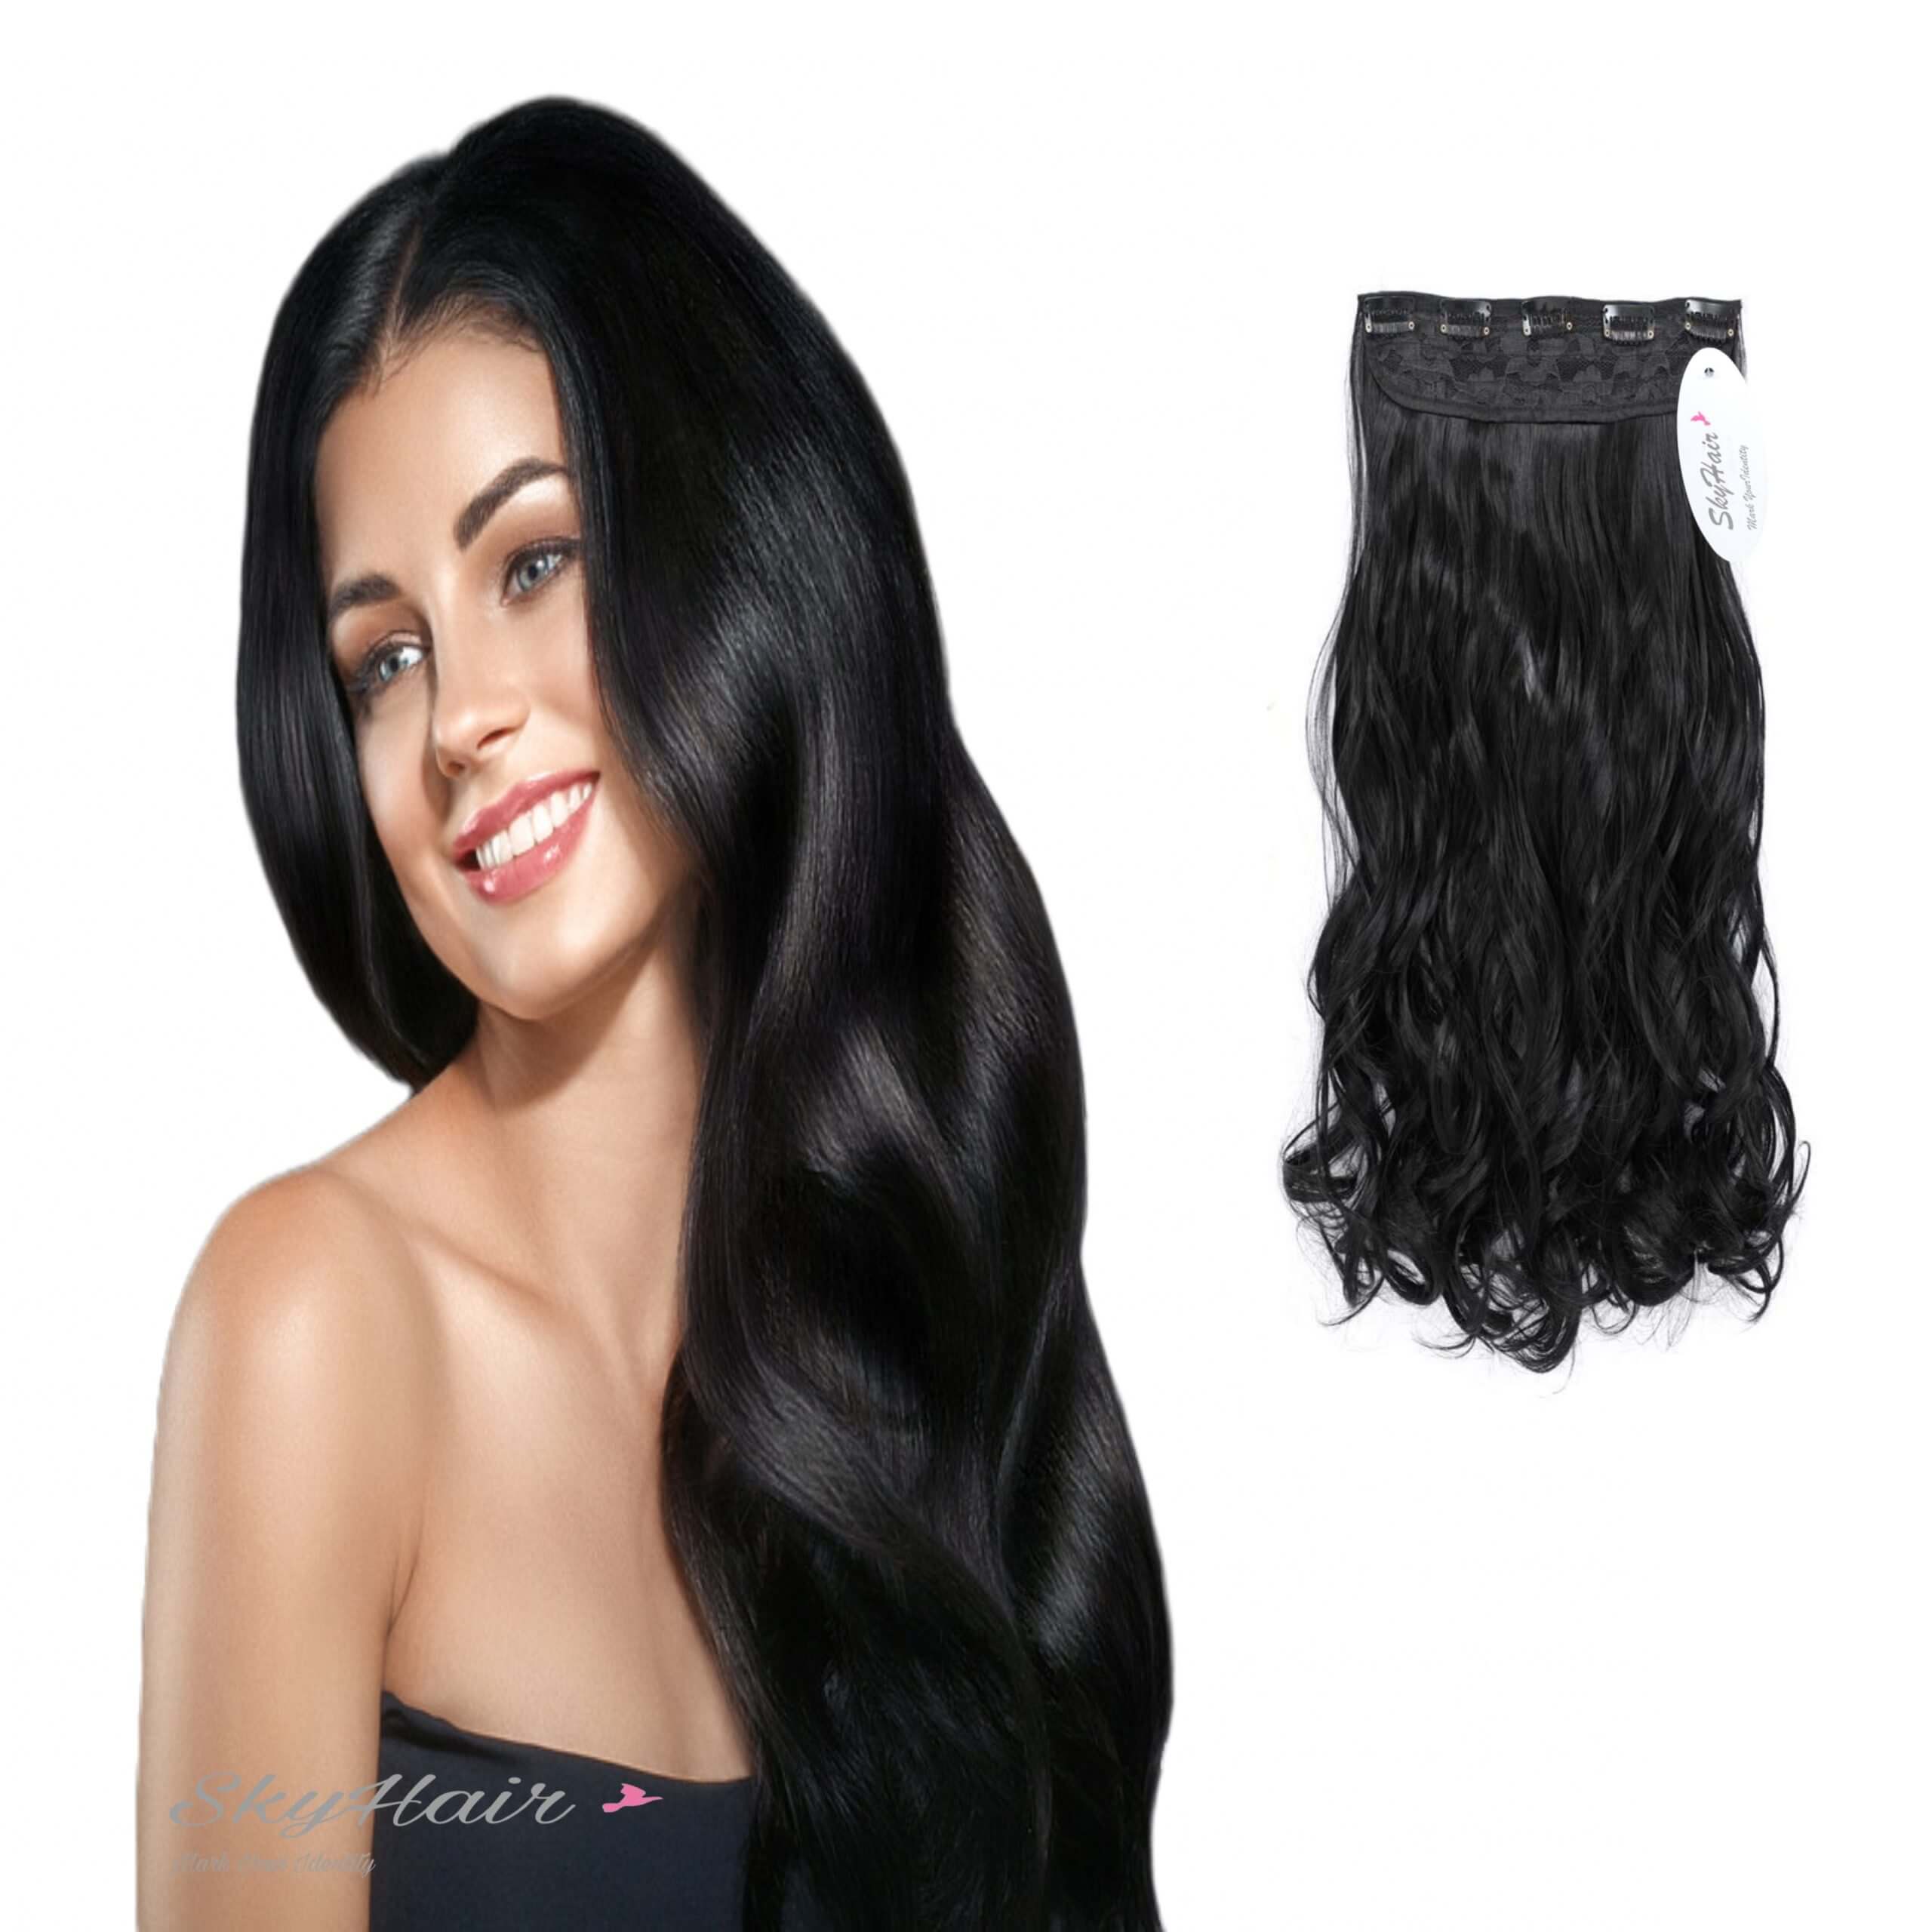 Buy 5 Clips Based Curly/Wavy Black Hair Extension Online at Best Price in  India